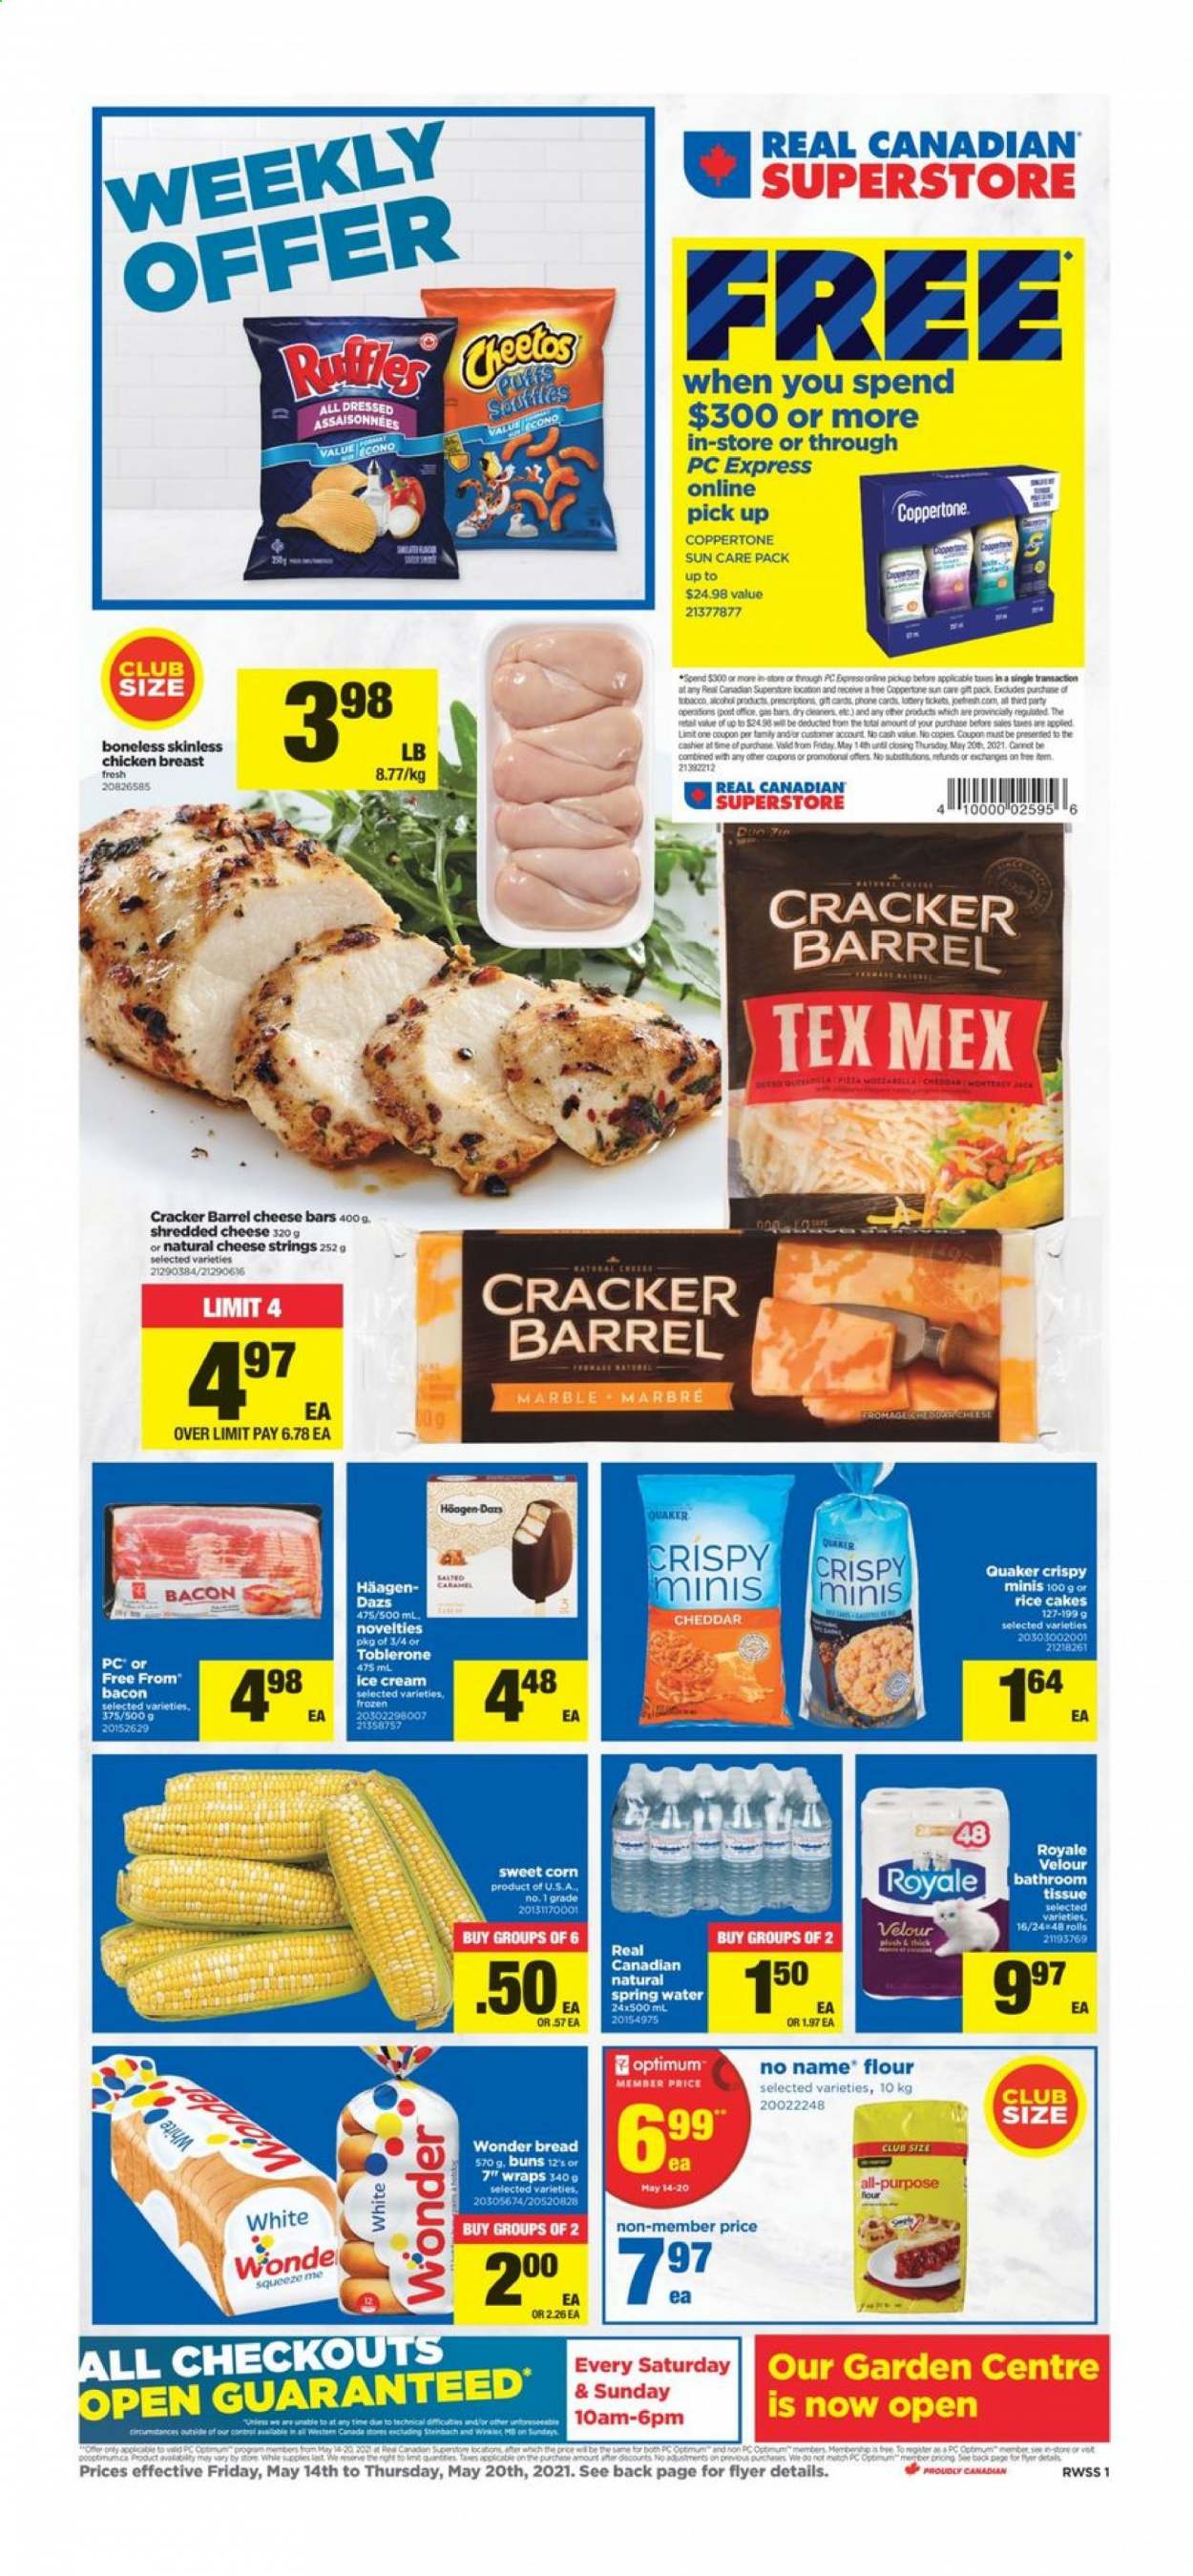 thumbnail - Real Canadian Superstore Flyer - May 14, 2021 - May 20, 2021 - Sales products - bread, buns, wraps, corn, sweet corn, periwinkle meat, No Name, Quaker, bacon, shredded cheese, ice cream, Häagen-Dazs, crackers, Toblerone, flour, caramel, spring water, chicken breasts, chicken, bath tissue, Optimum. Page 1.